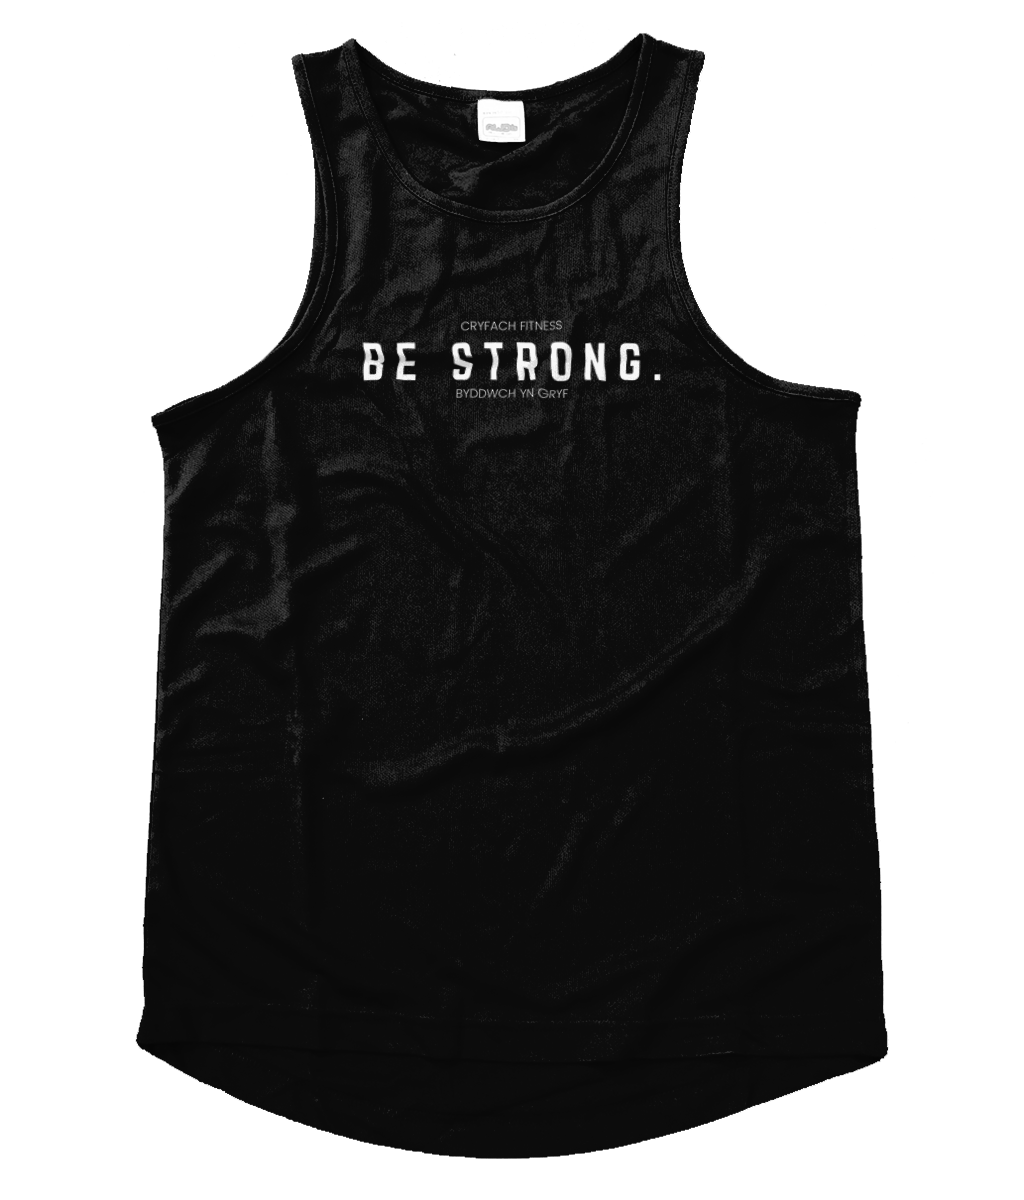 Be Strong Men's Breathable Vest